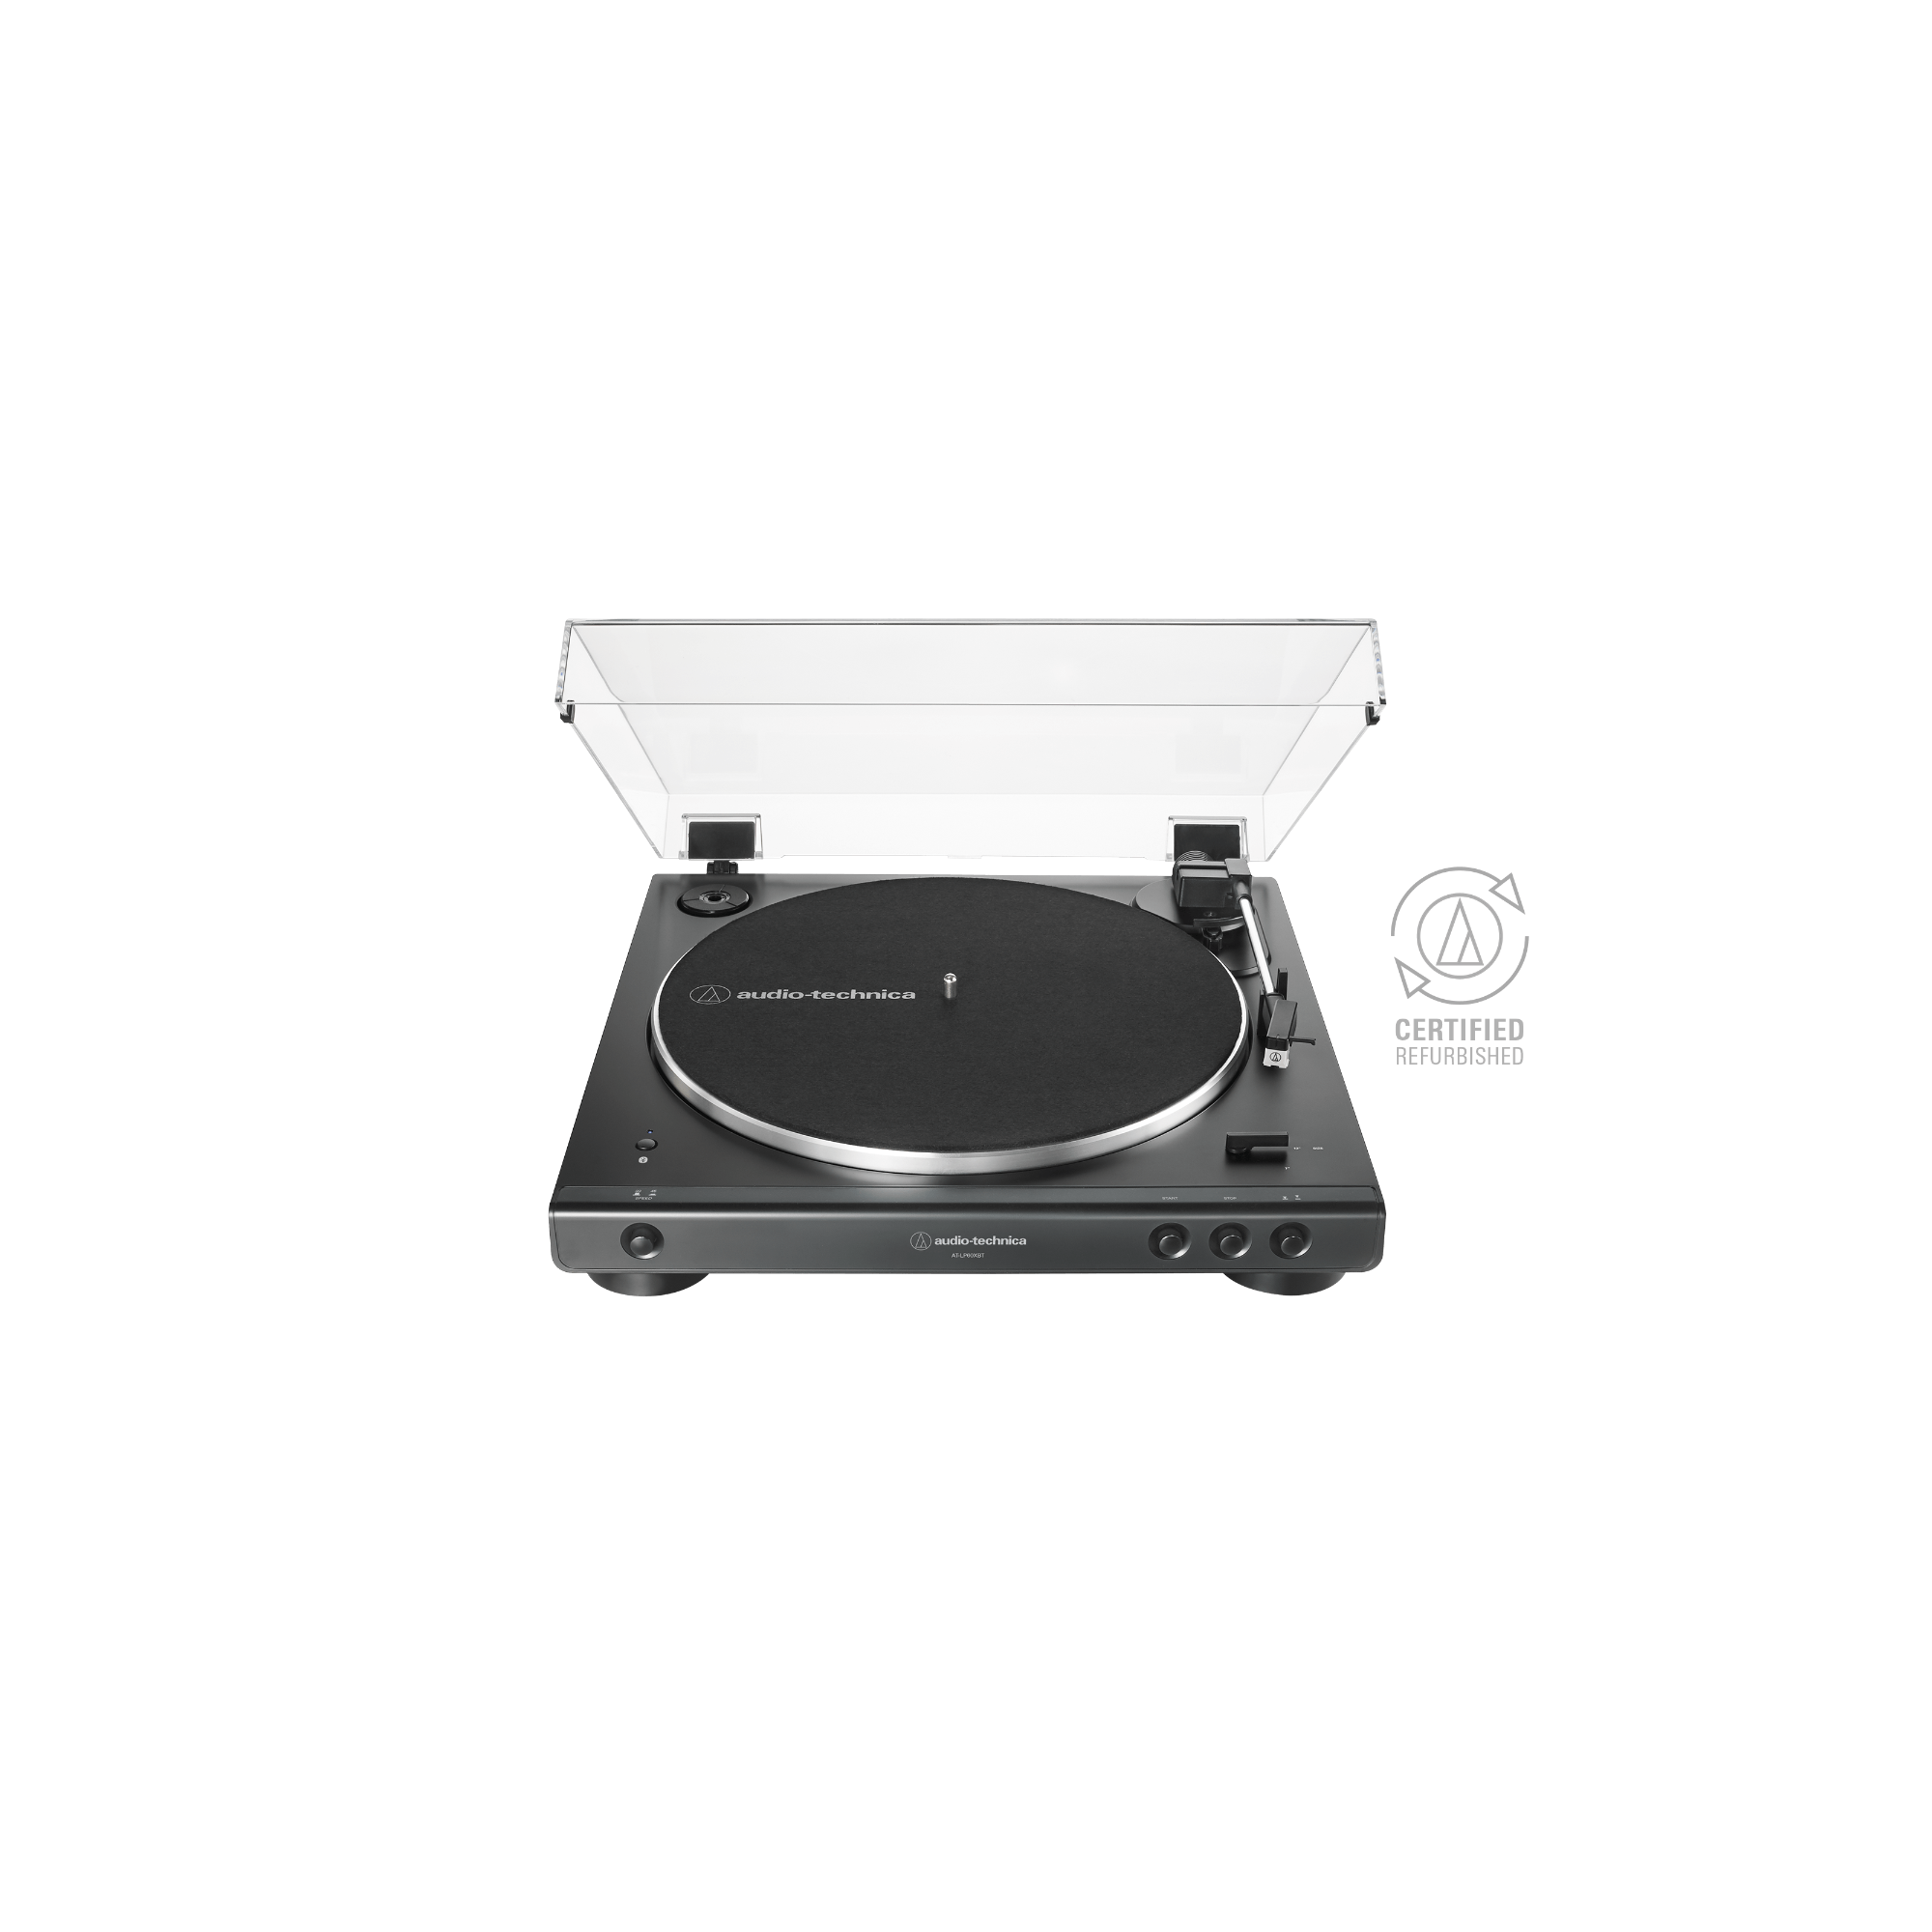 Fully Automatic Wireless Belt-Drive Turntable, AT-LP60XBT-BK-CR Certified  Refurbished